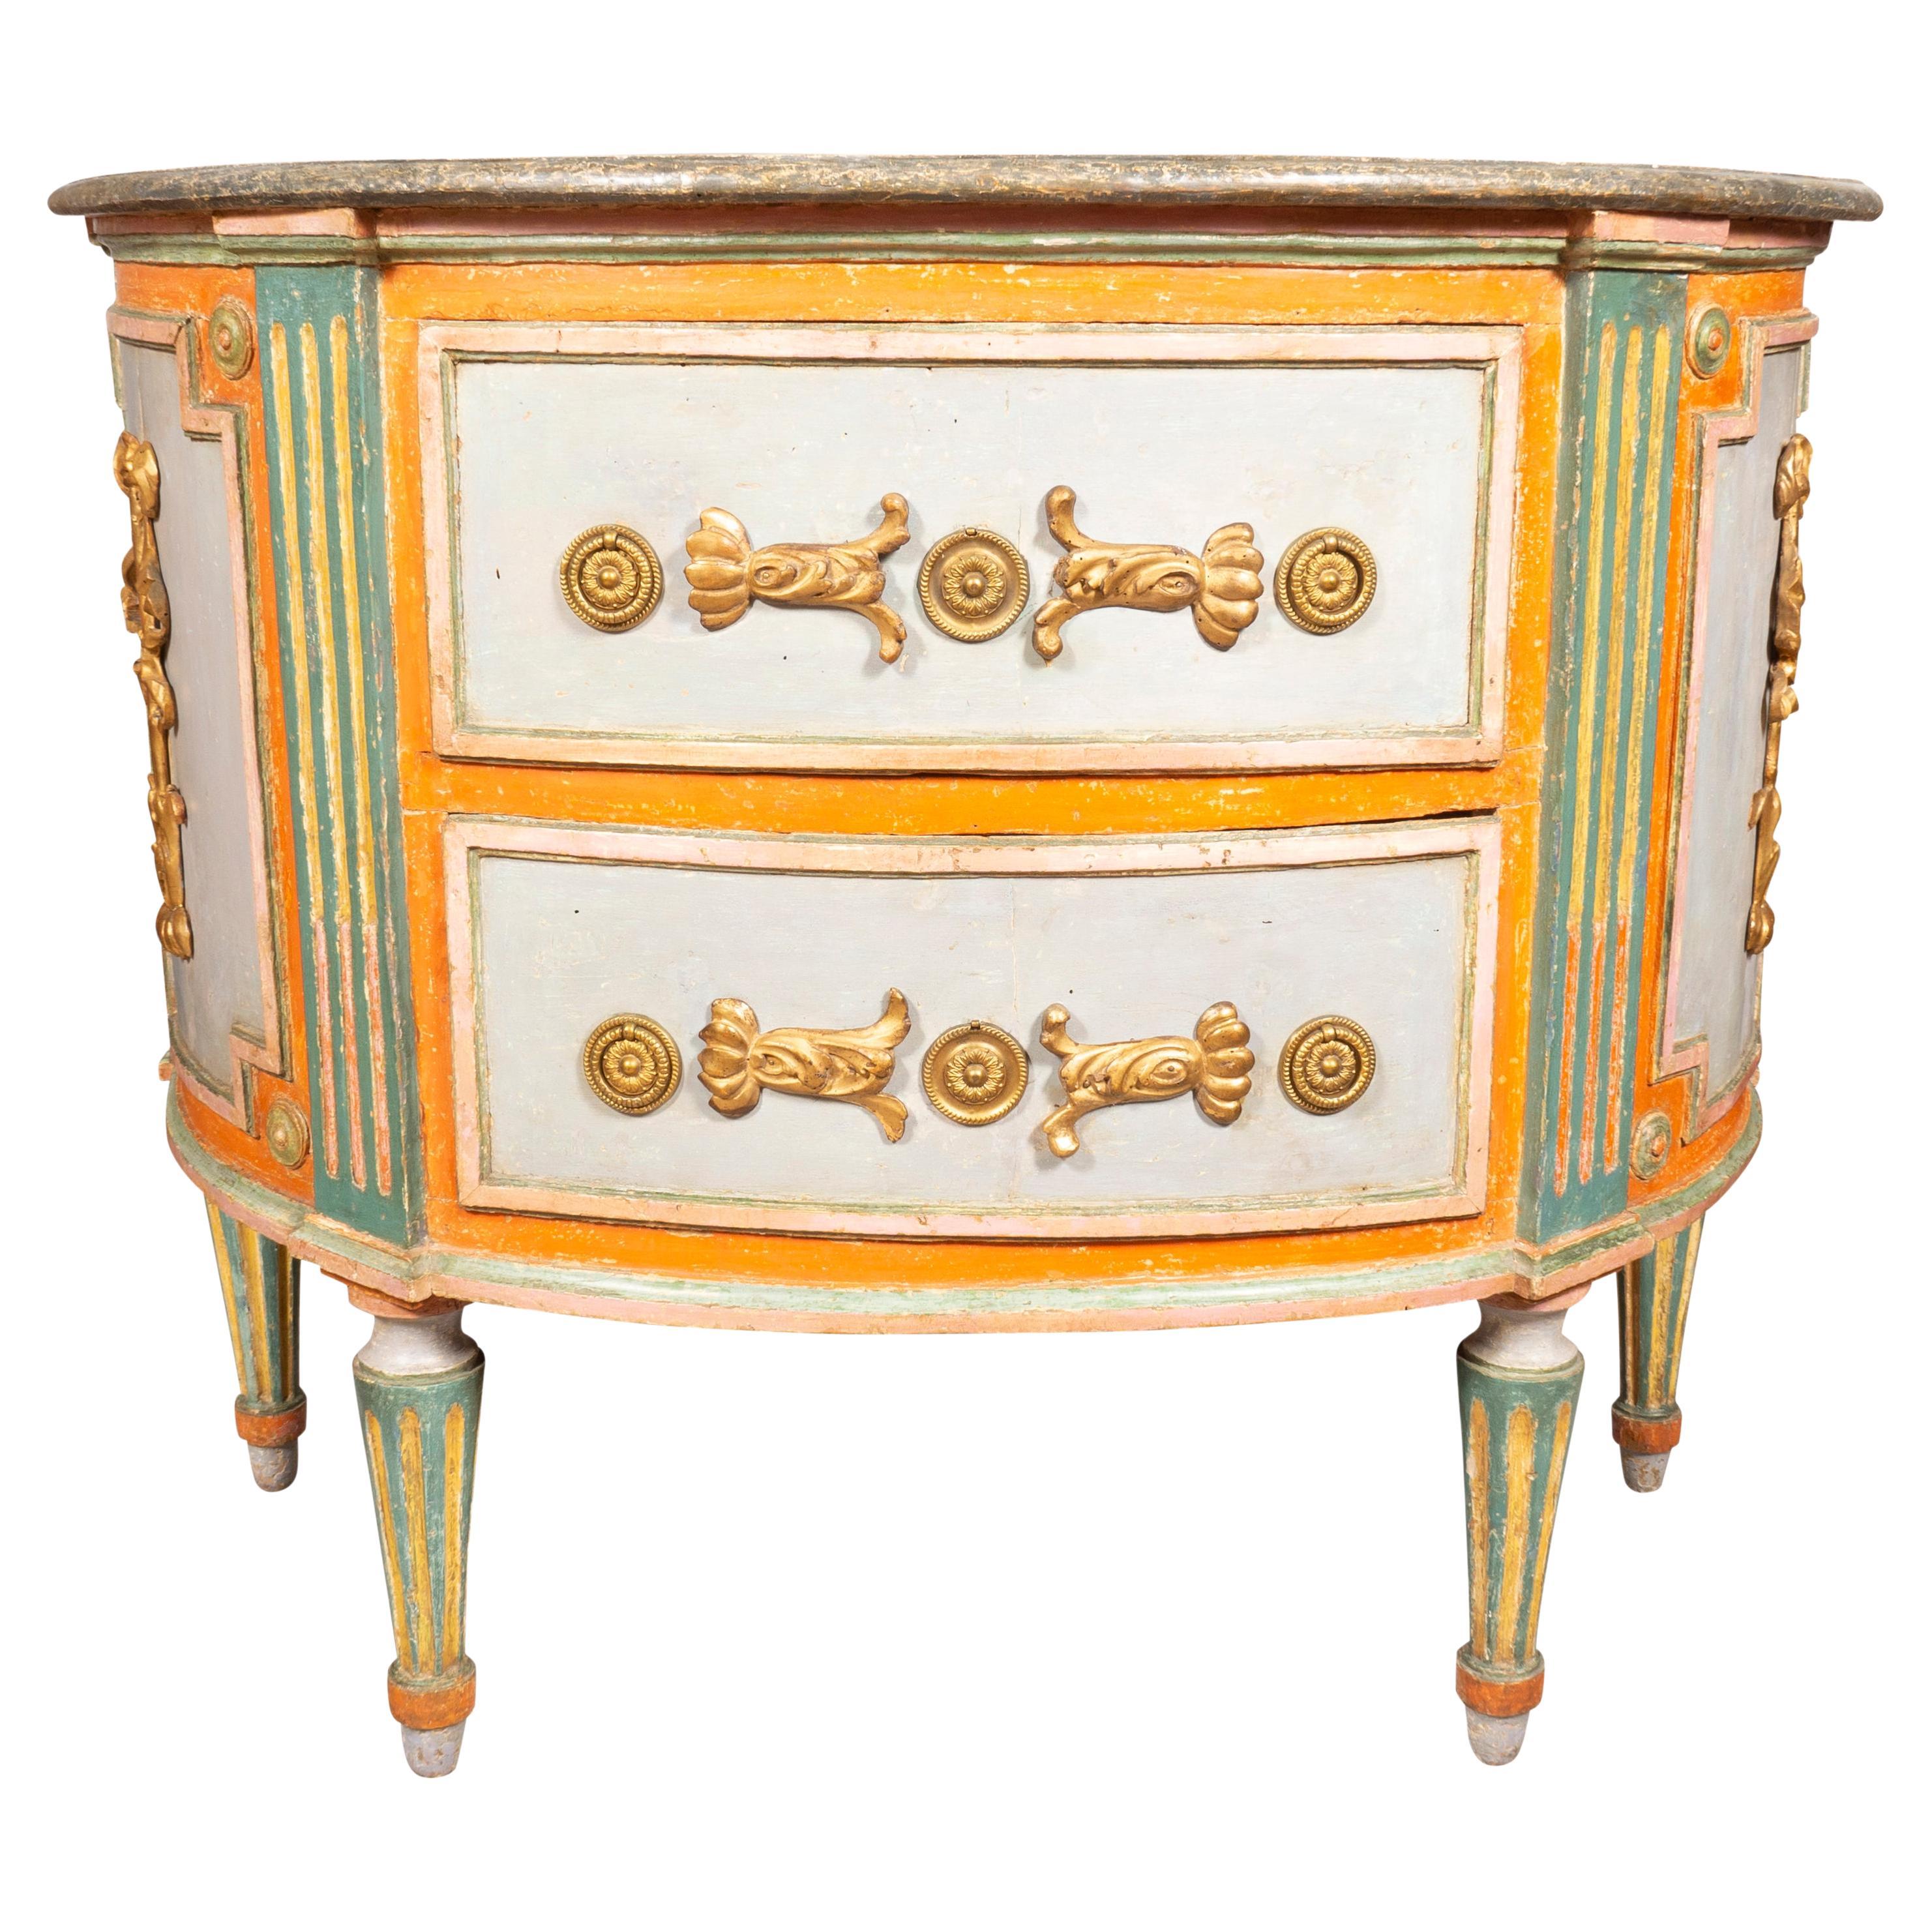 With demilune white and grey faux marble top over a conforming case section with two drawers with brass ring handles and stylized mounted giltwood acanthus leaves ,the case sides with gilded ribbon tassels. Raised on circular tapered fluted legs.